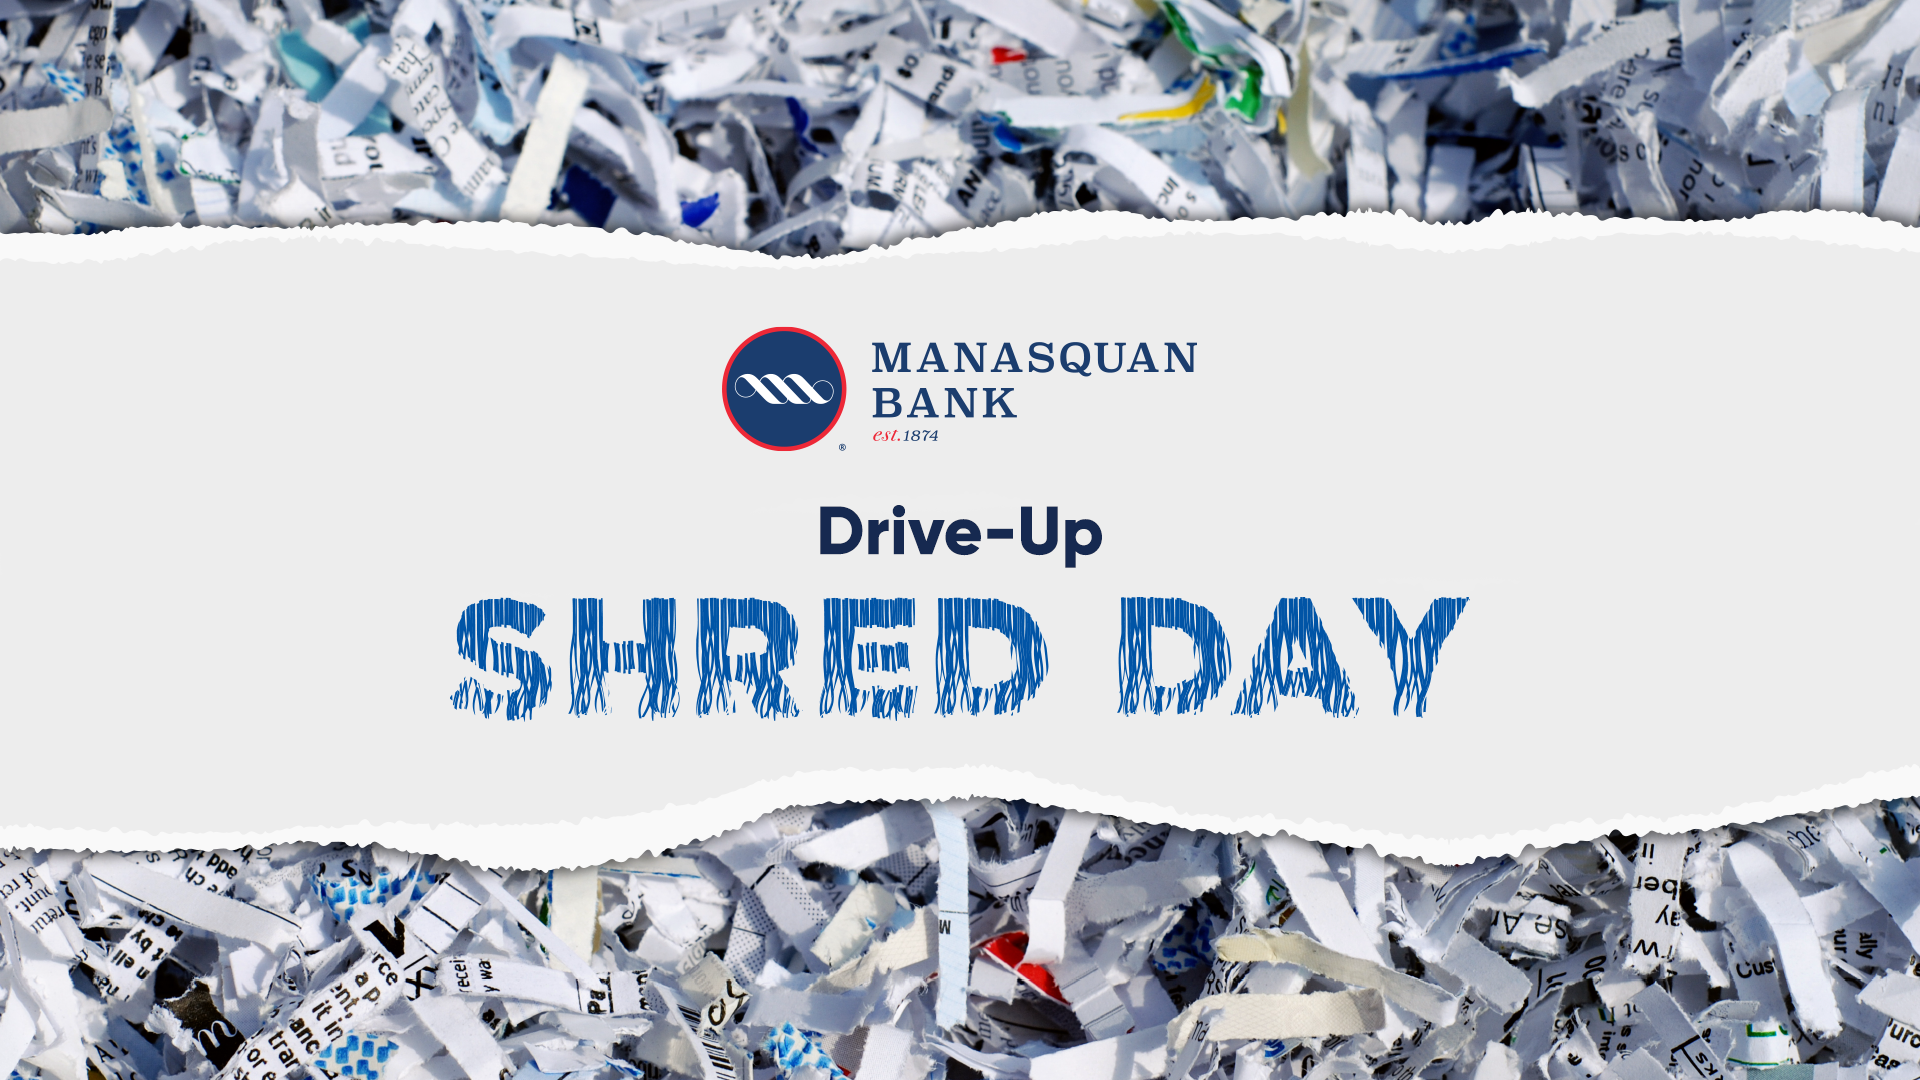 Shred Day at Little Egg Harbor, Saturday, June 4th